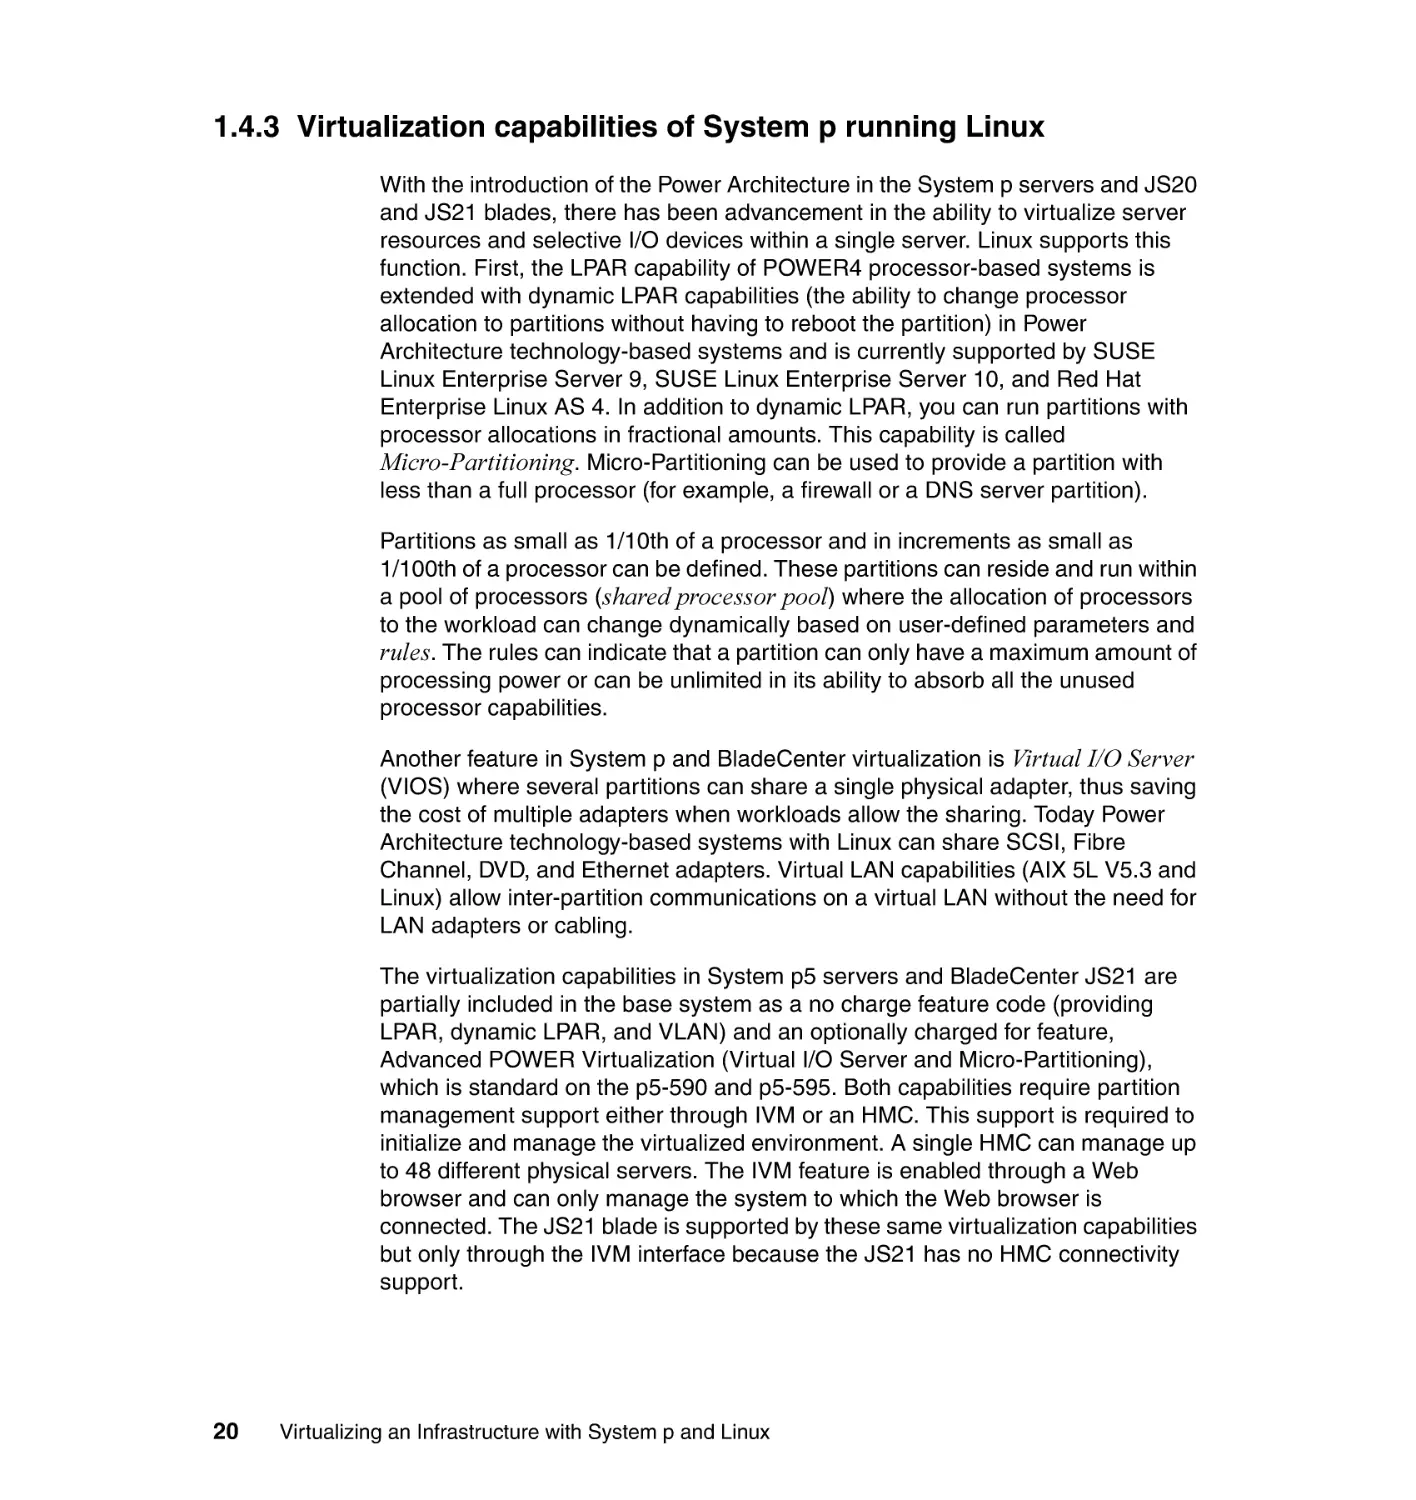 1.4.3 Virtualization capabilities of System p running Linux